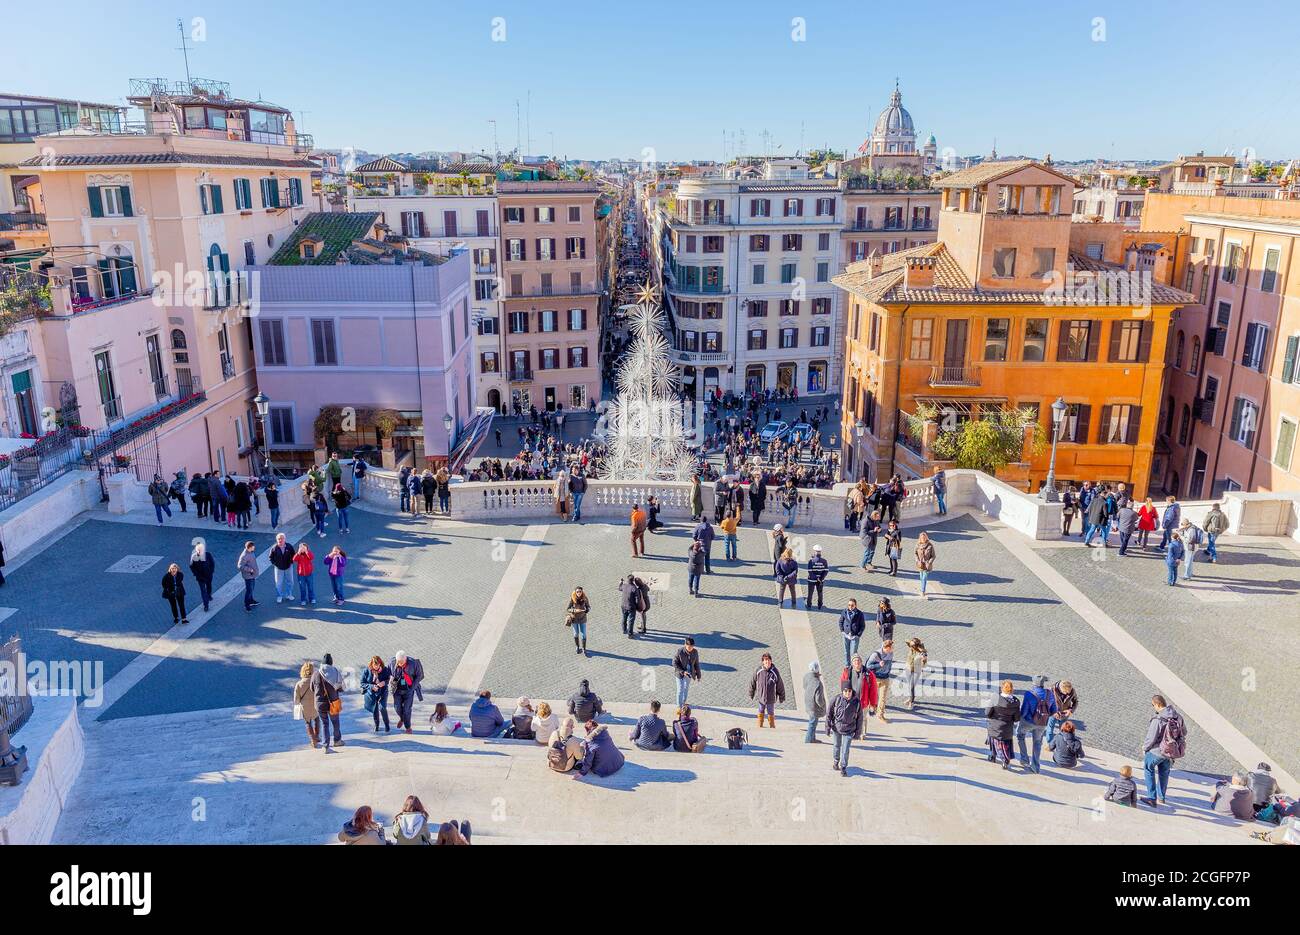 Piazza di Spagna, Rome, Italy. Piazza di Spagna, at the bottom of the Spanish Steps, is one of the most famous squares in Rome. Stock Photo